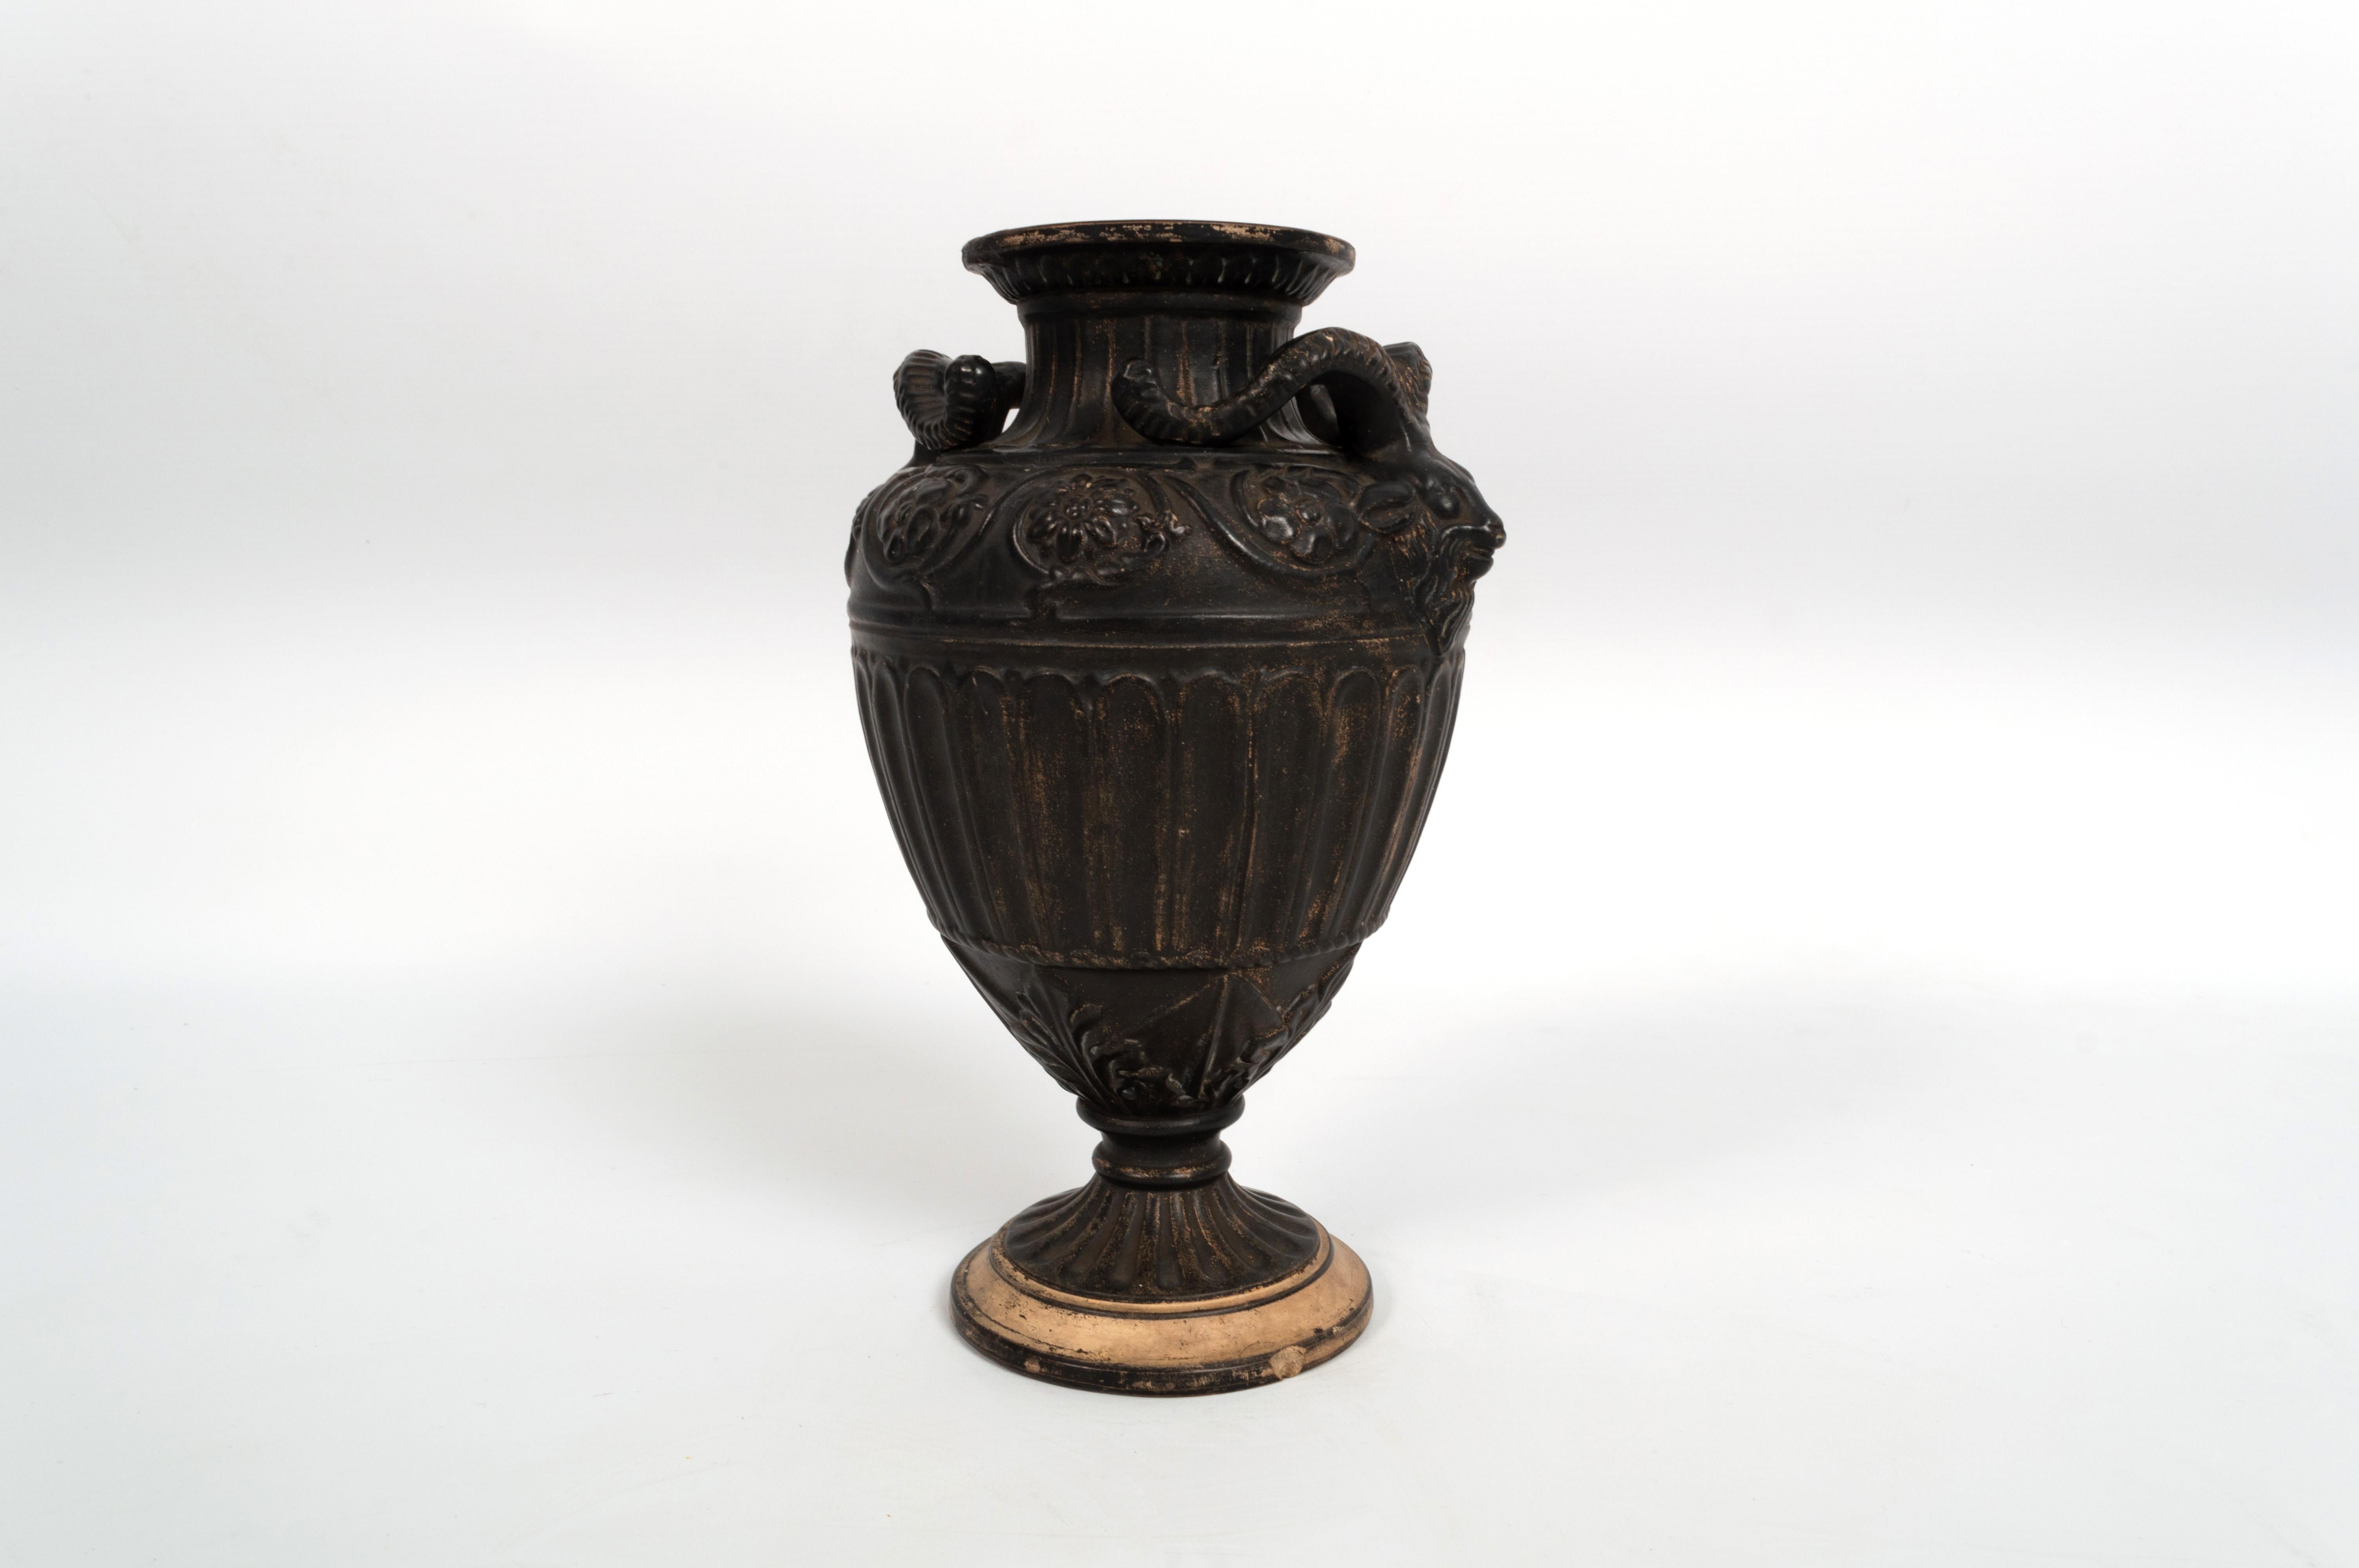 Antique 19th Century Neoclassical Vase By Gerbing & Stephan, Germany, 1892 In Good Condition For Sale In London, GB